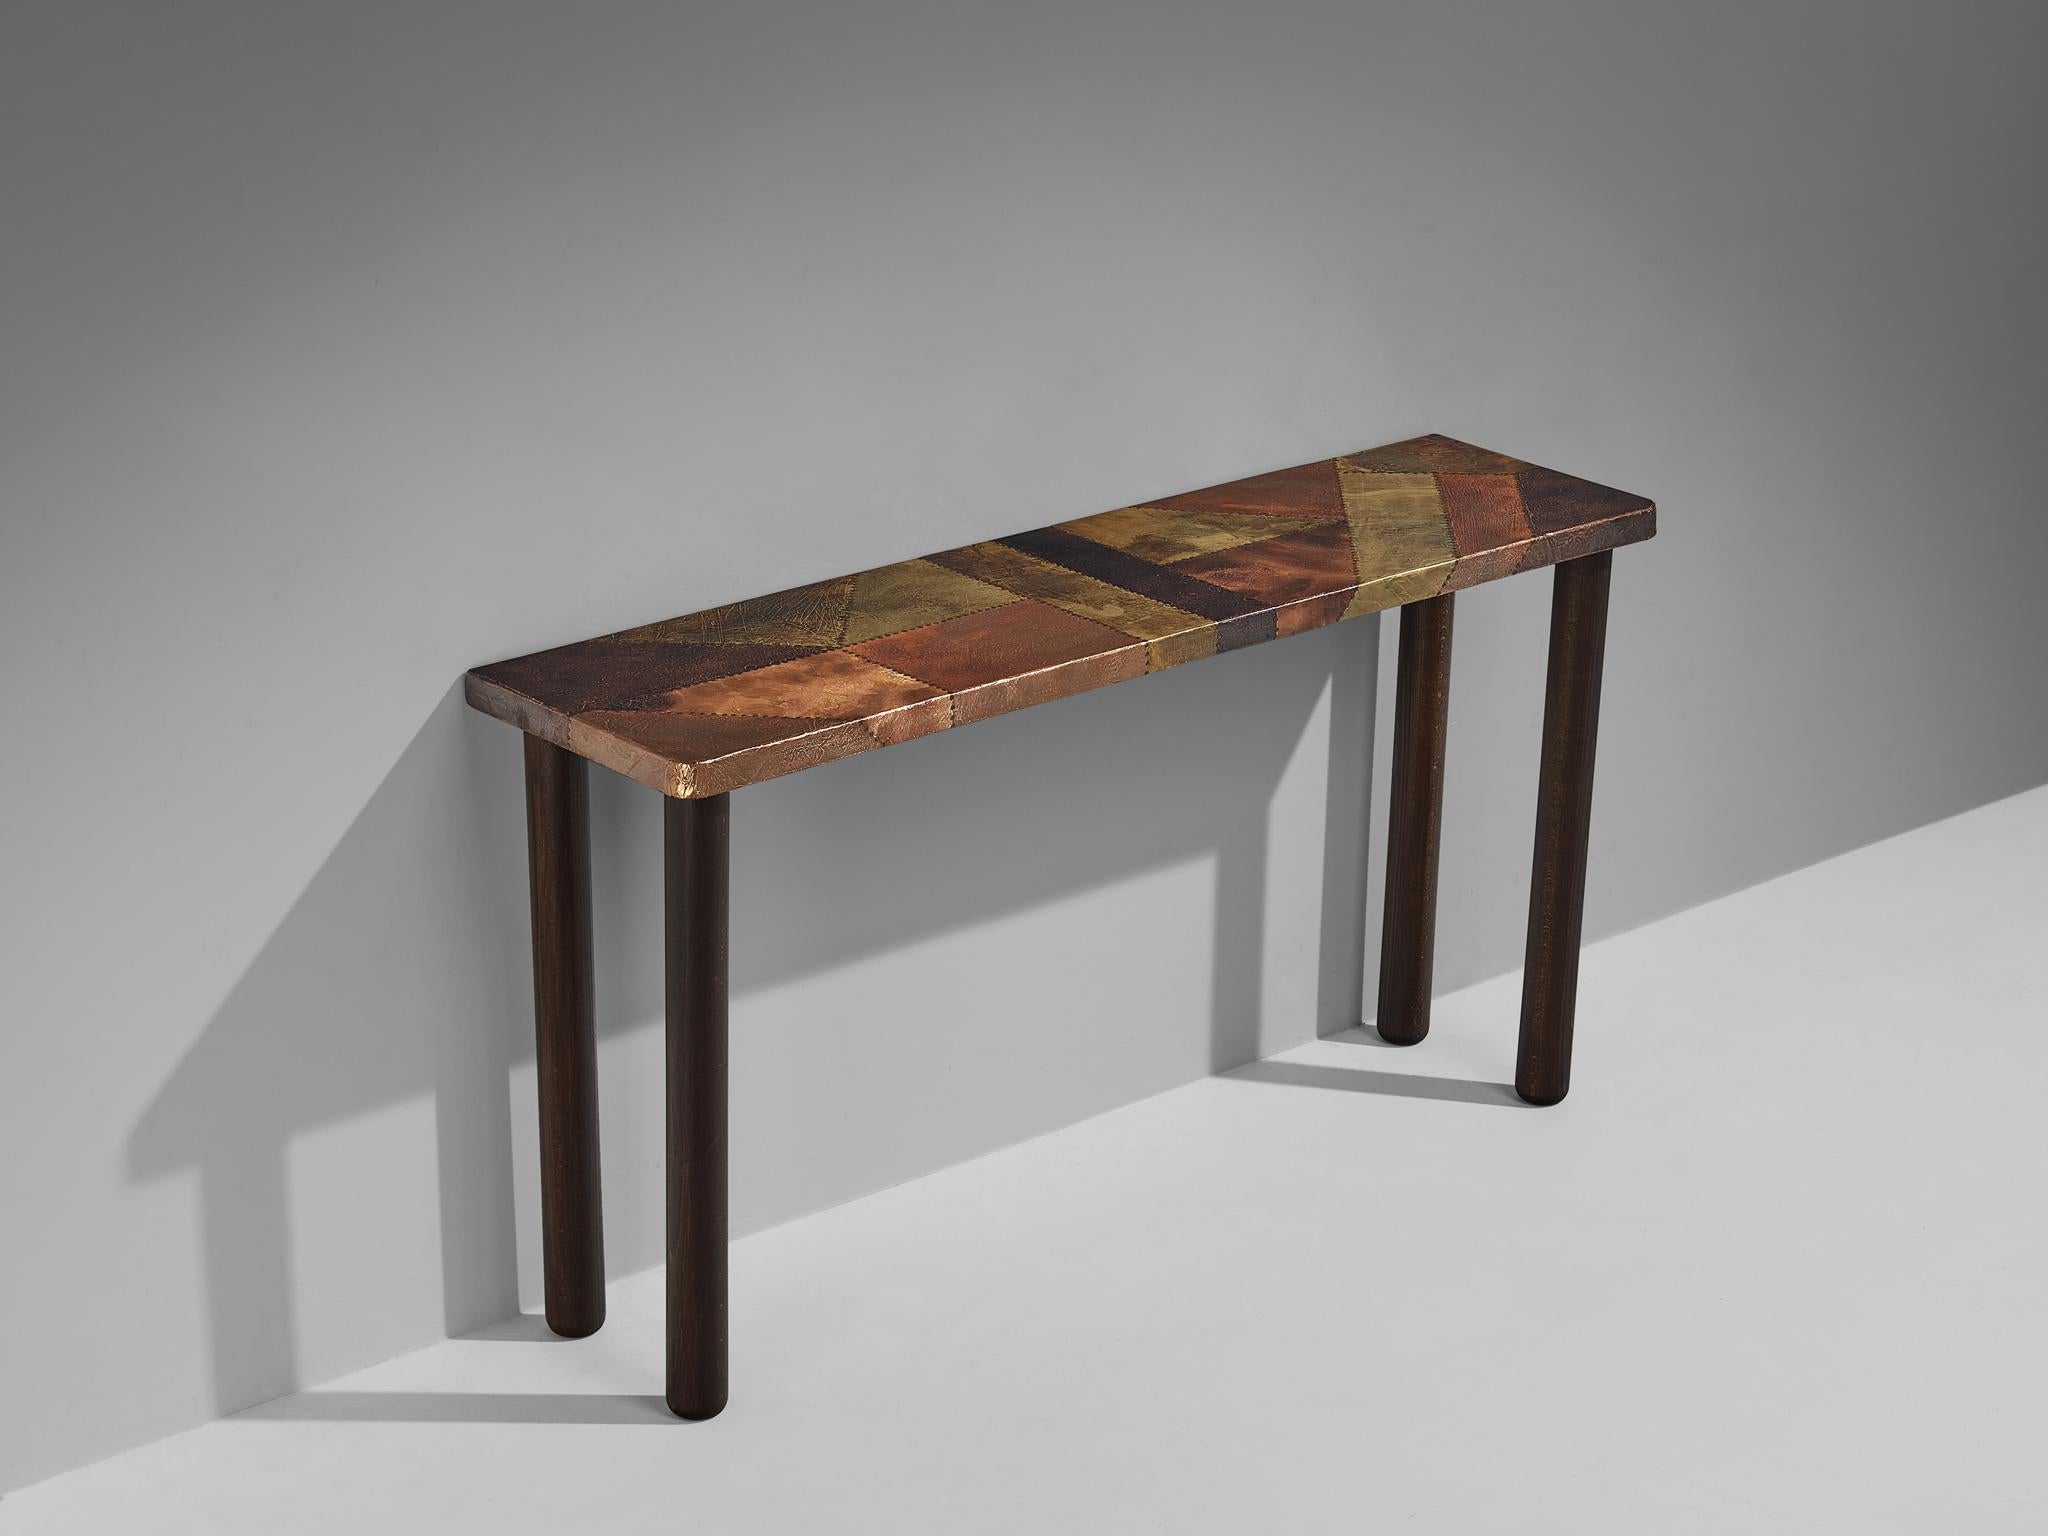 Lorenzo Burchiellaro, console table, copper, stained wood, Italy, 1960s

This magnificent console table is created by Italian designer and sculptor Lorenzo Burchiellaro (1933-2017) in the 1960s. The copper is in beautiful, patinated condition and